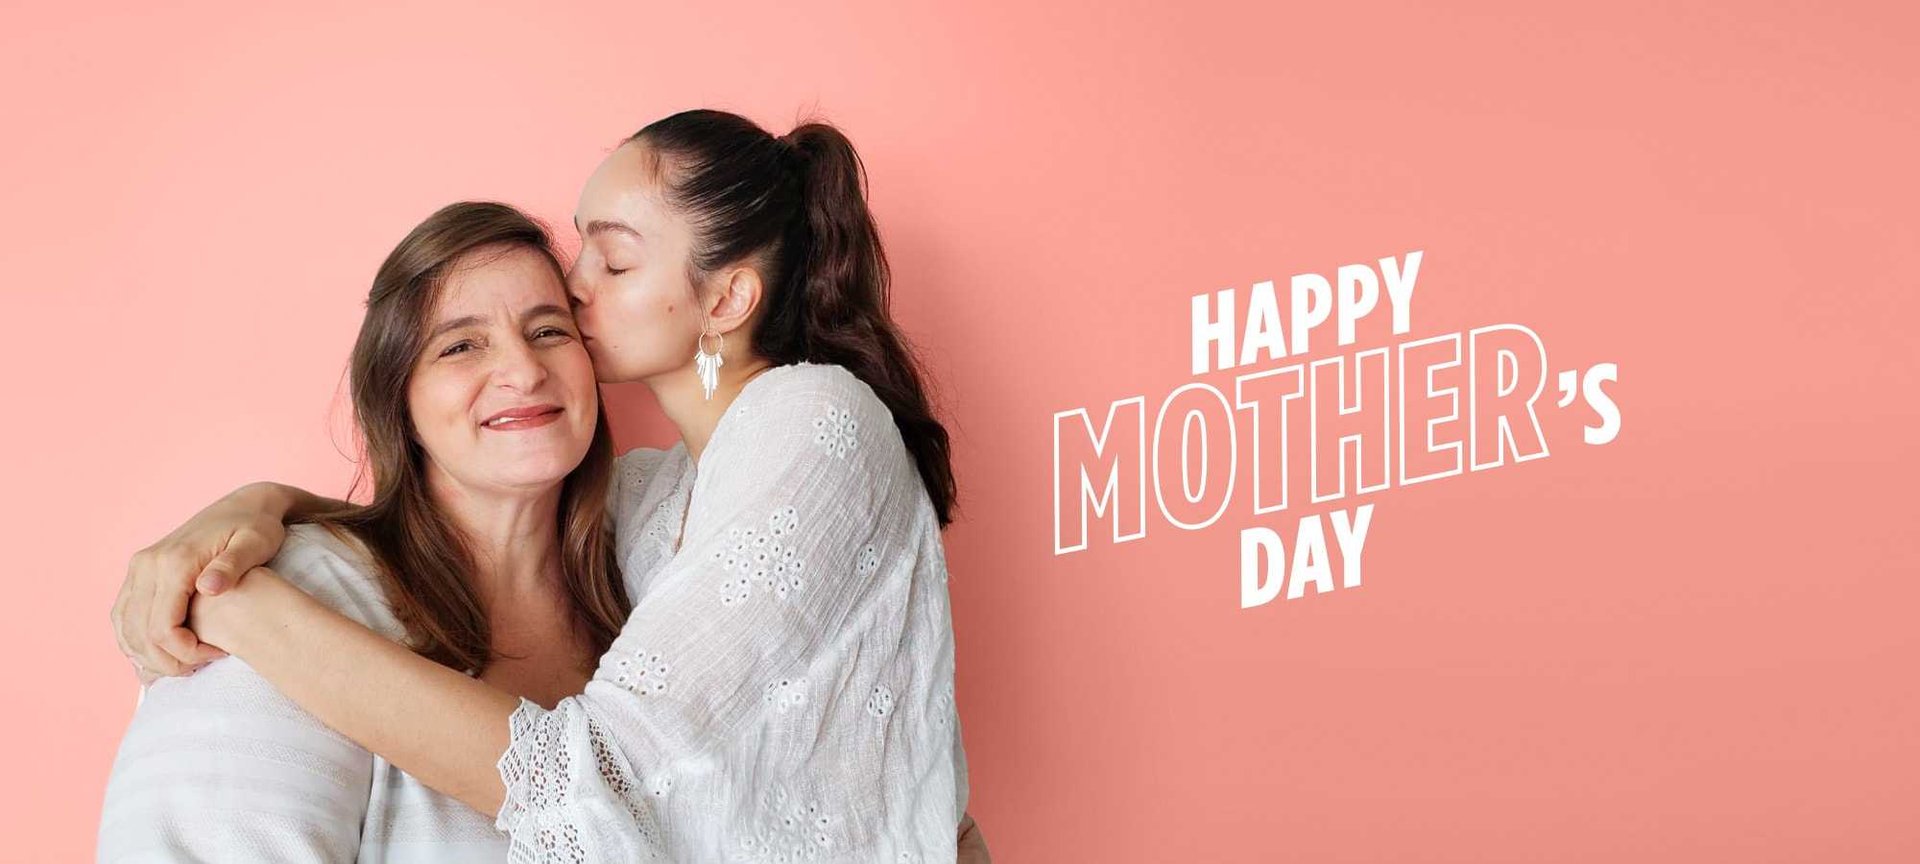 Celebrate Mother's Day with L'Oreal Beauty & Gratitude | L'Oreal Paris